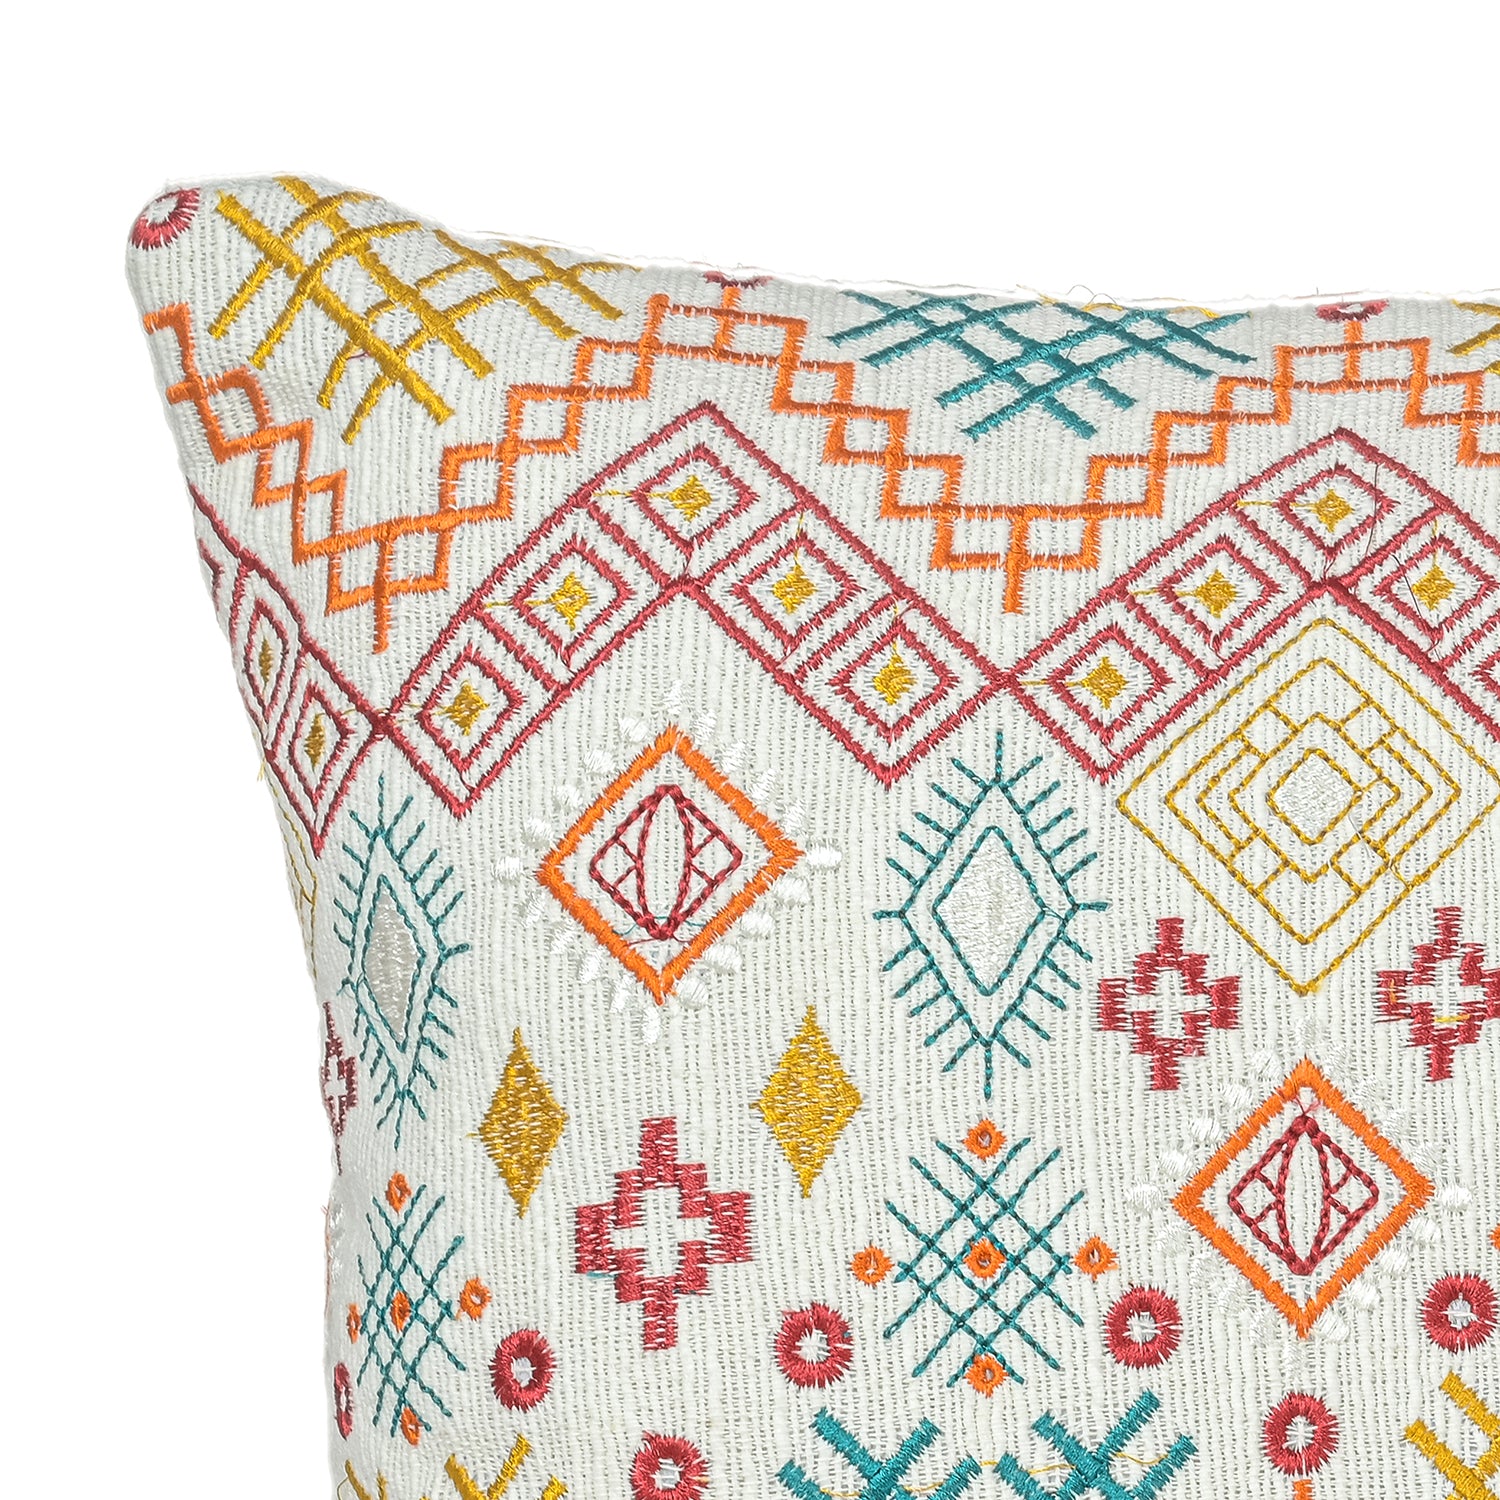 Indian Illusion Throw Pillow Cover